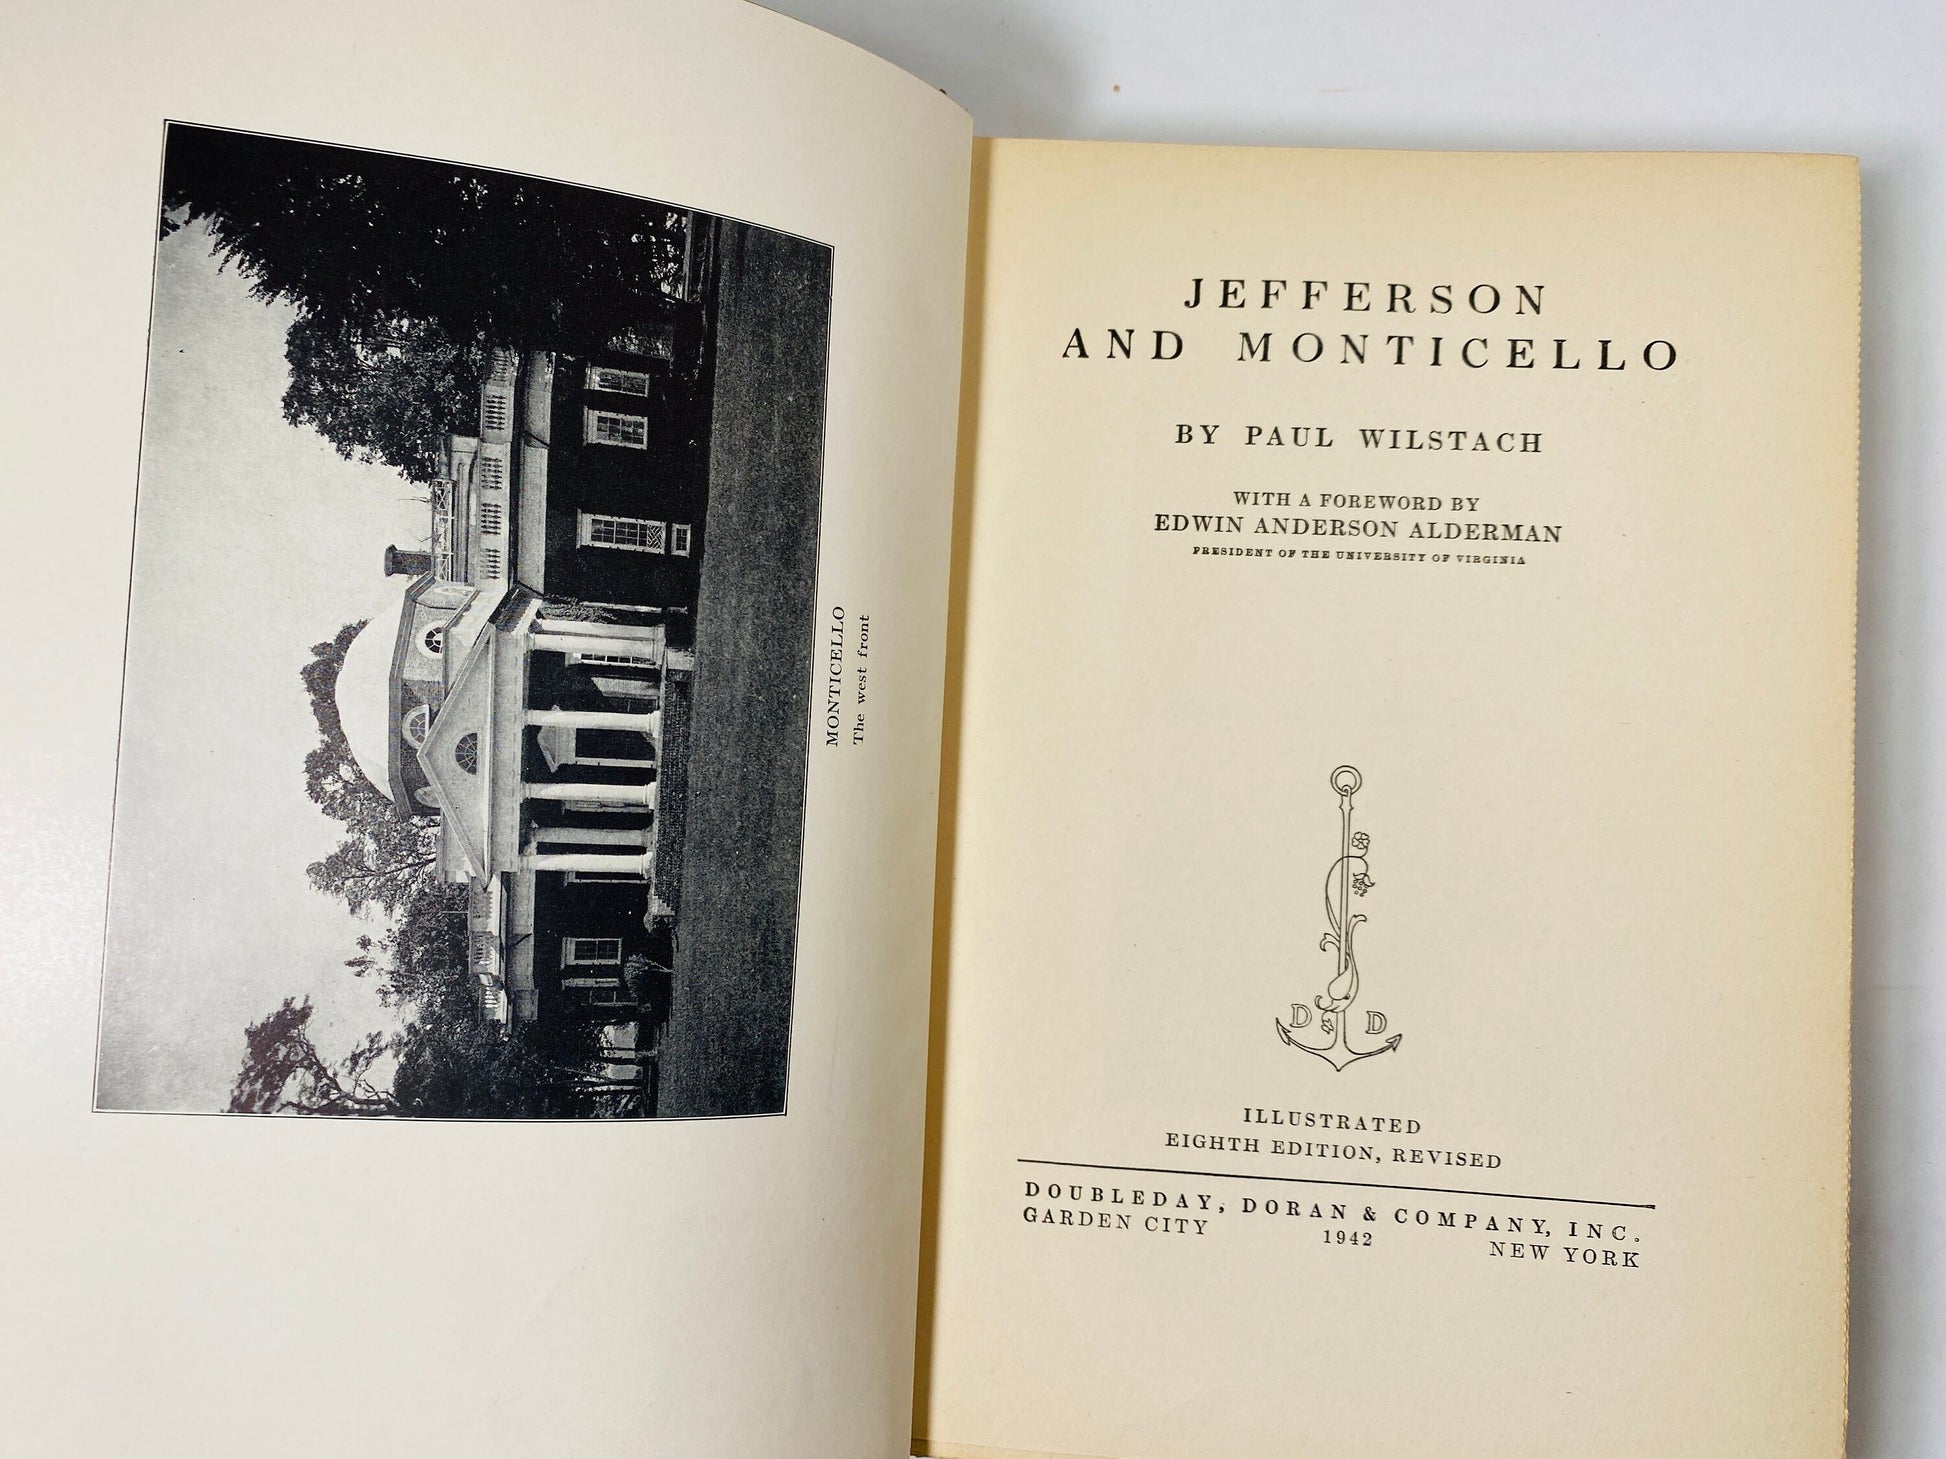 1929 SIGNED Thomas Jefferson and Monticello vintage book by Paul Wilstach Intimate History FIRST EDITION antique Presidential biography